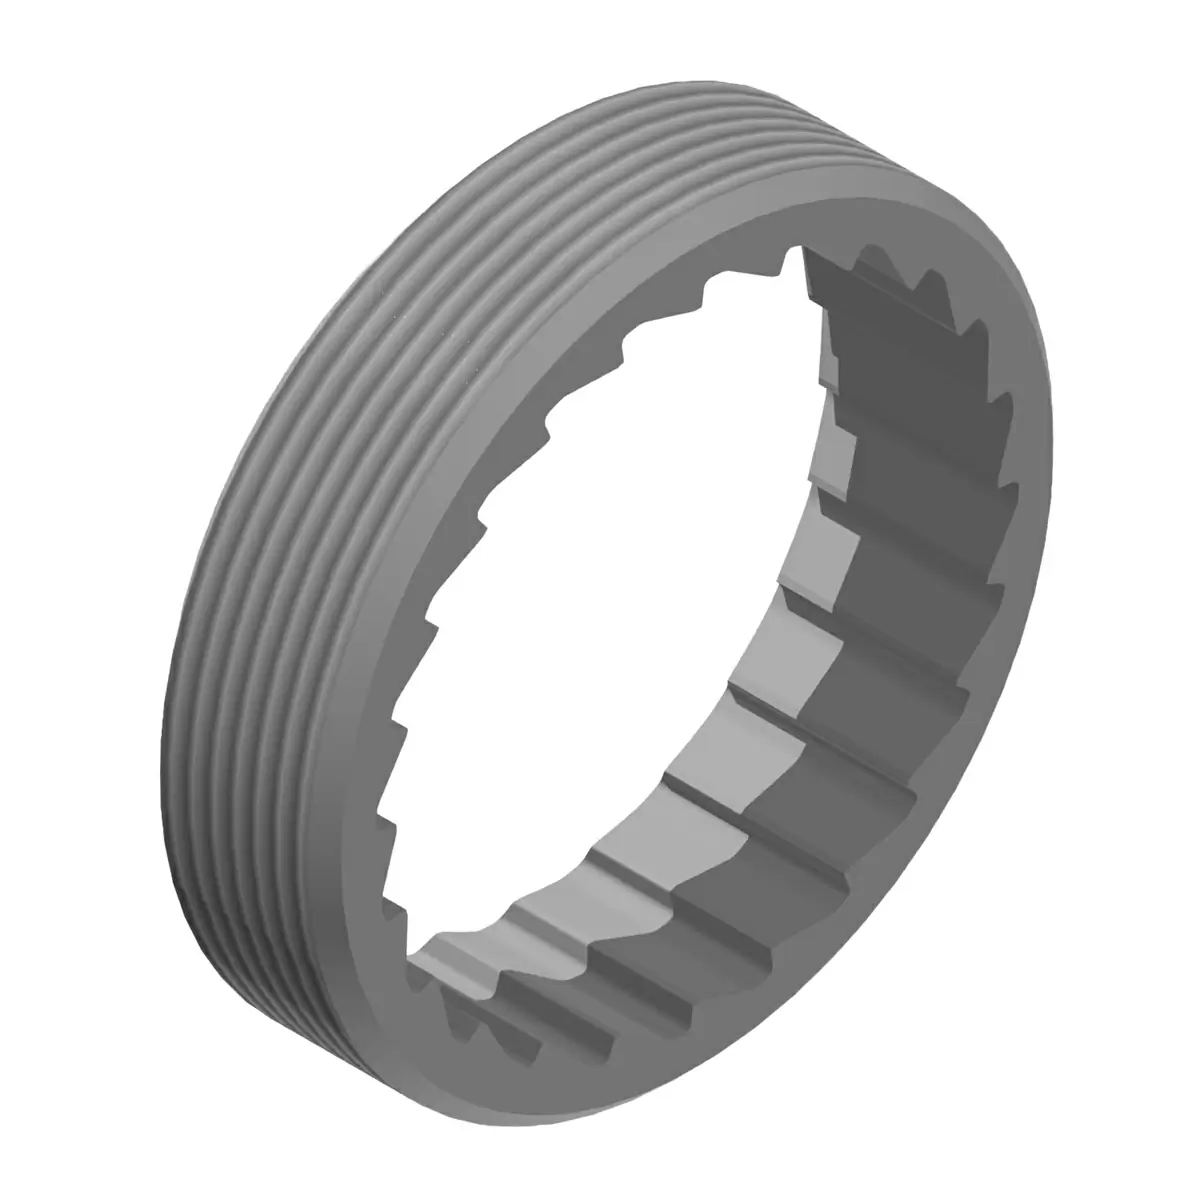 Toothed ring nut M35x1 Hybrid for 370 hubs H1900 wheels - image